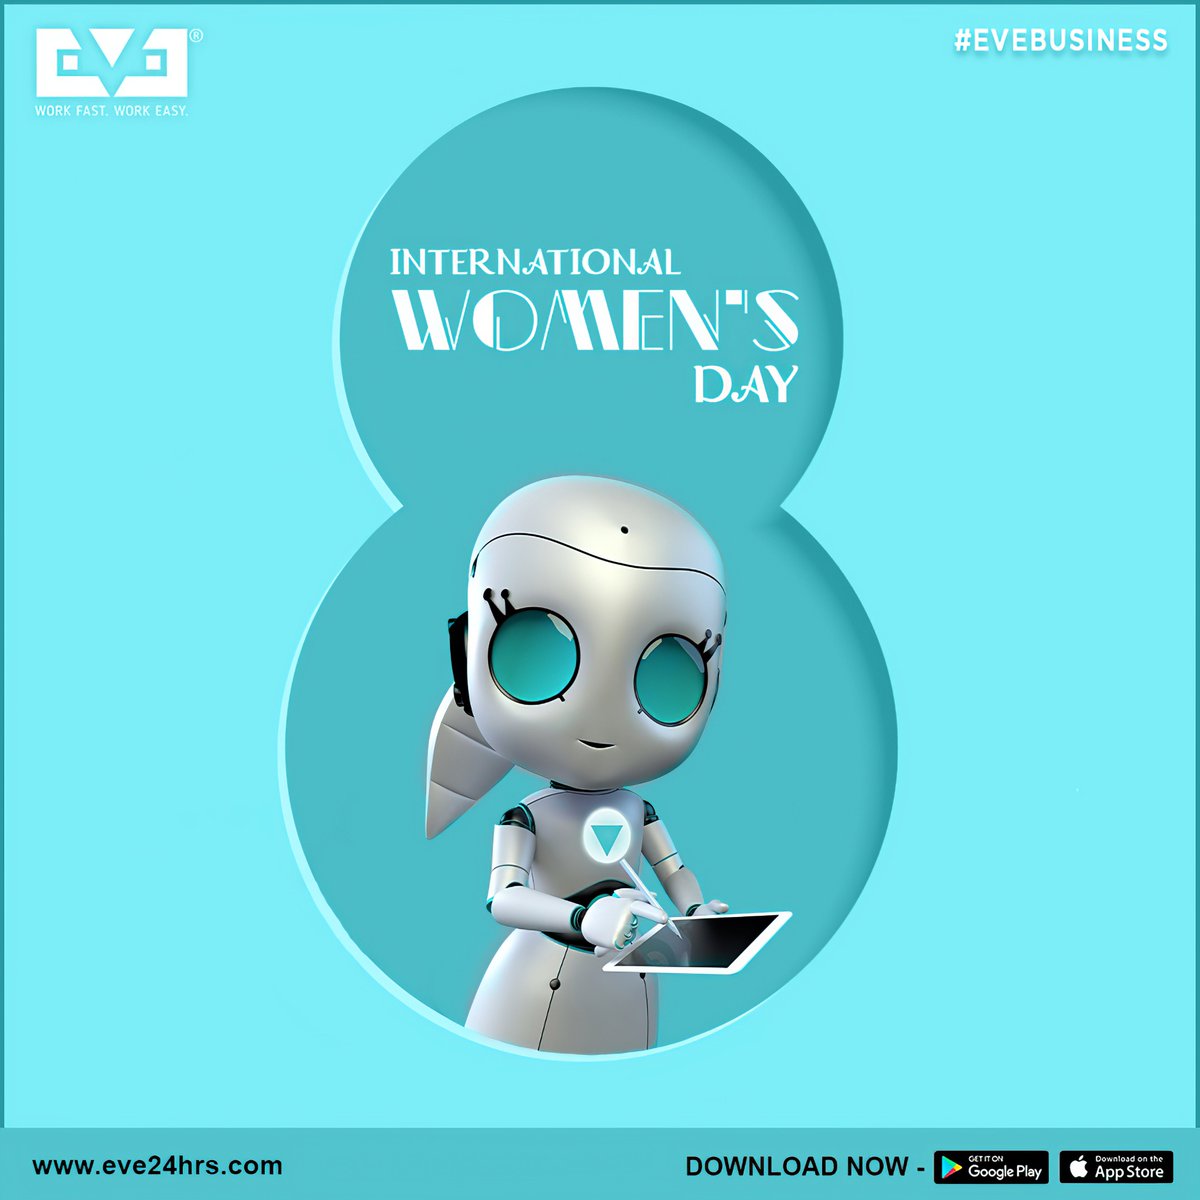 Happy International Women’s Day from all of us at Eve!

EVE Available on Android, Web & iOS
Download NOW!
#EveApp
#EveFacts
#EveBusiness
#EveBusinessApp
#FollowingTheTrend
#WorkFastWorkEasy
#IWD2020 
#InternationalWomensDay 
#InternationalWomensDay2020 
#WomensDay2020